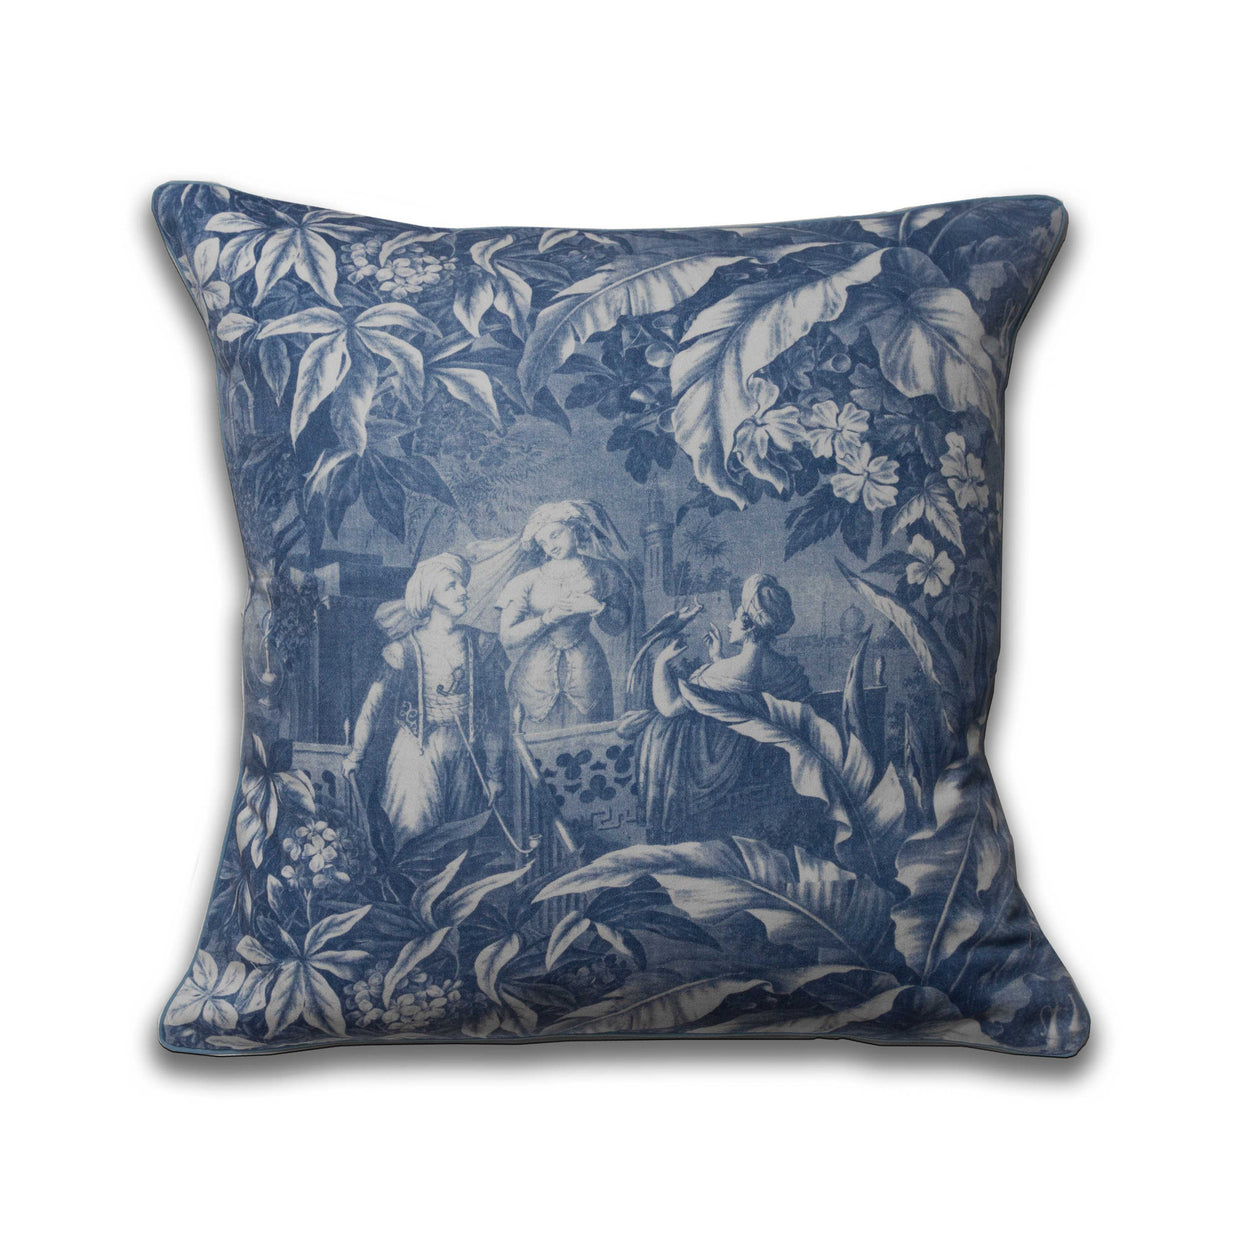 Mary Jane McCarty New Vintage fabric pillow